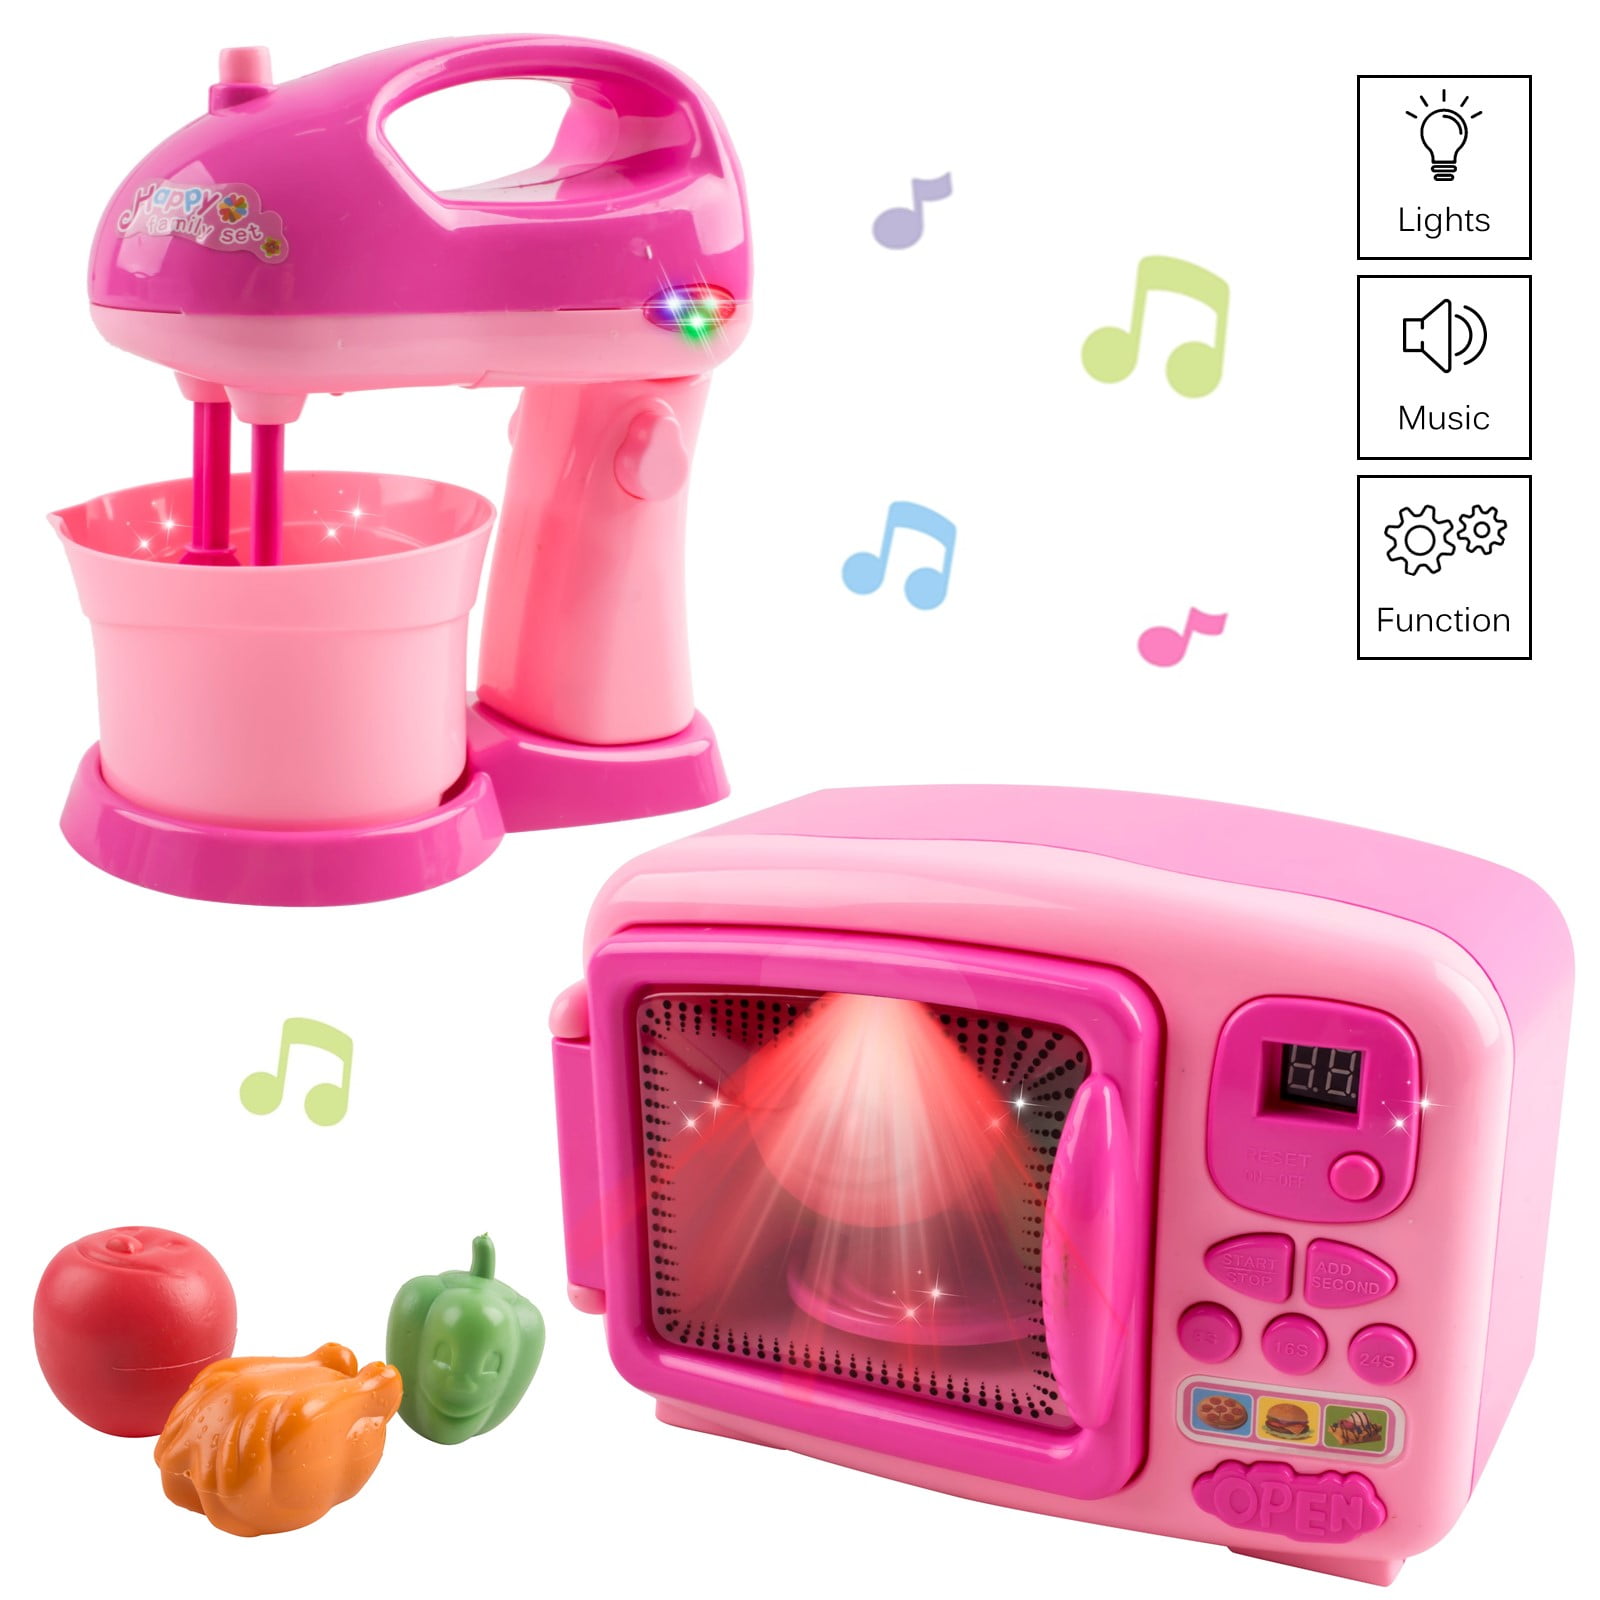 Kids Toy Microwave Oven Home Appliance Girl Pretend Role Play Xmas Gift Set 